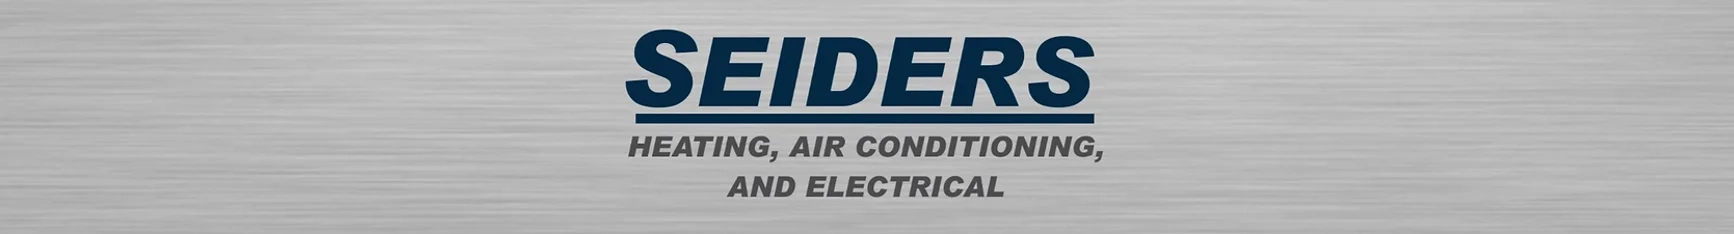 Seiders Heating, Air Conditioning, and Electrical Logo